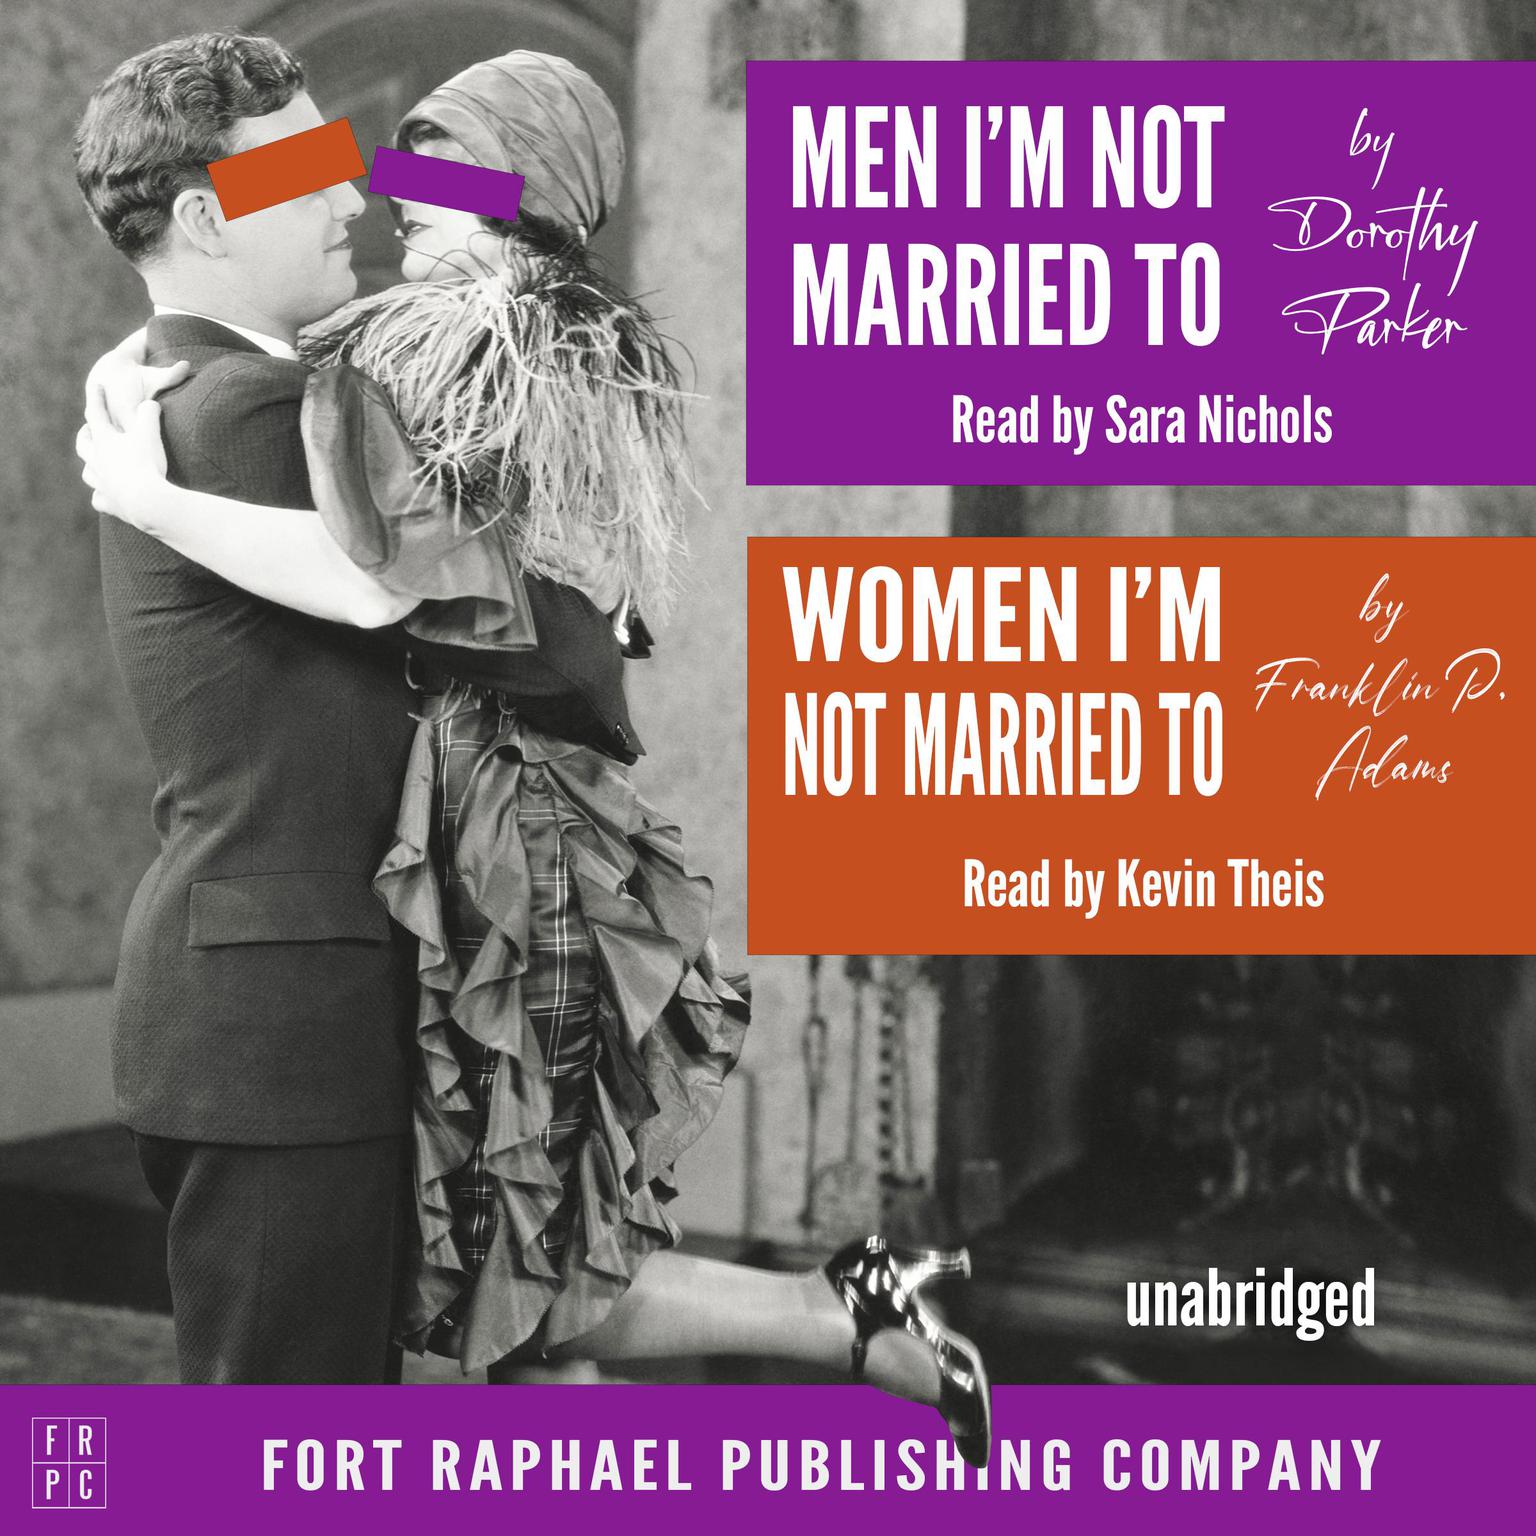 Men Im Not Married To and Women Im Not Married To - Unabridged Audiobook, by Dorothy Parker